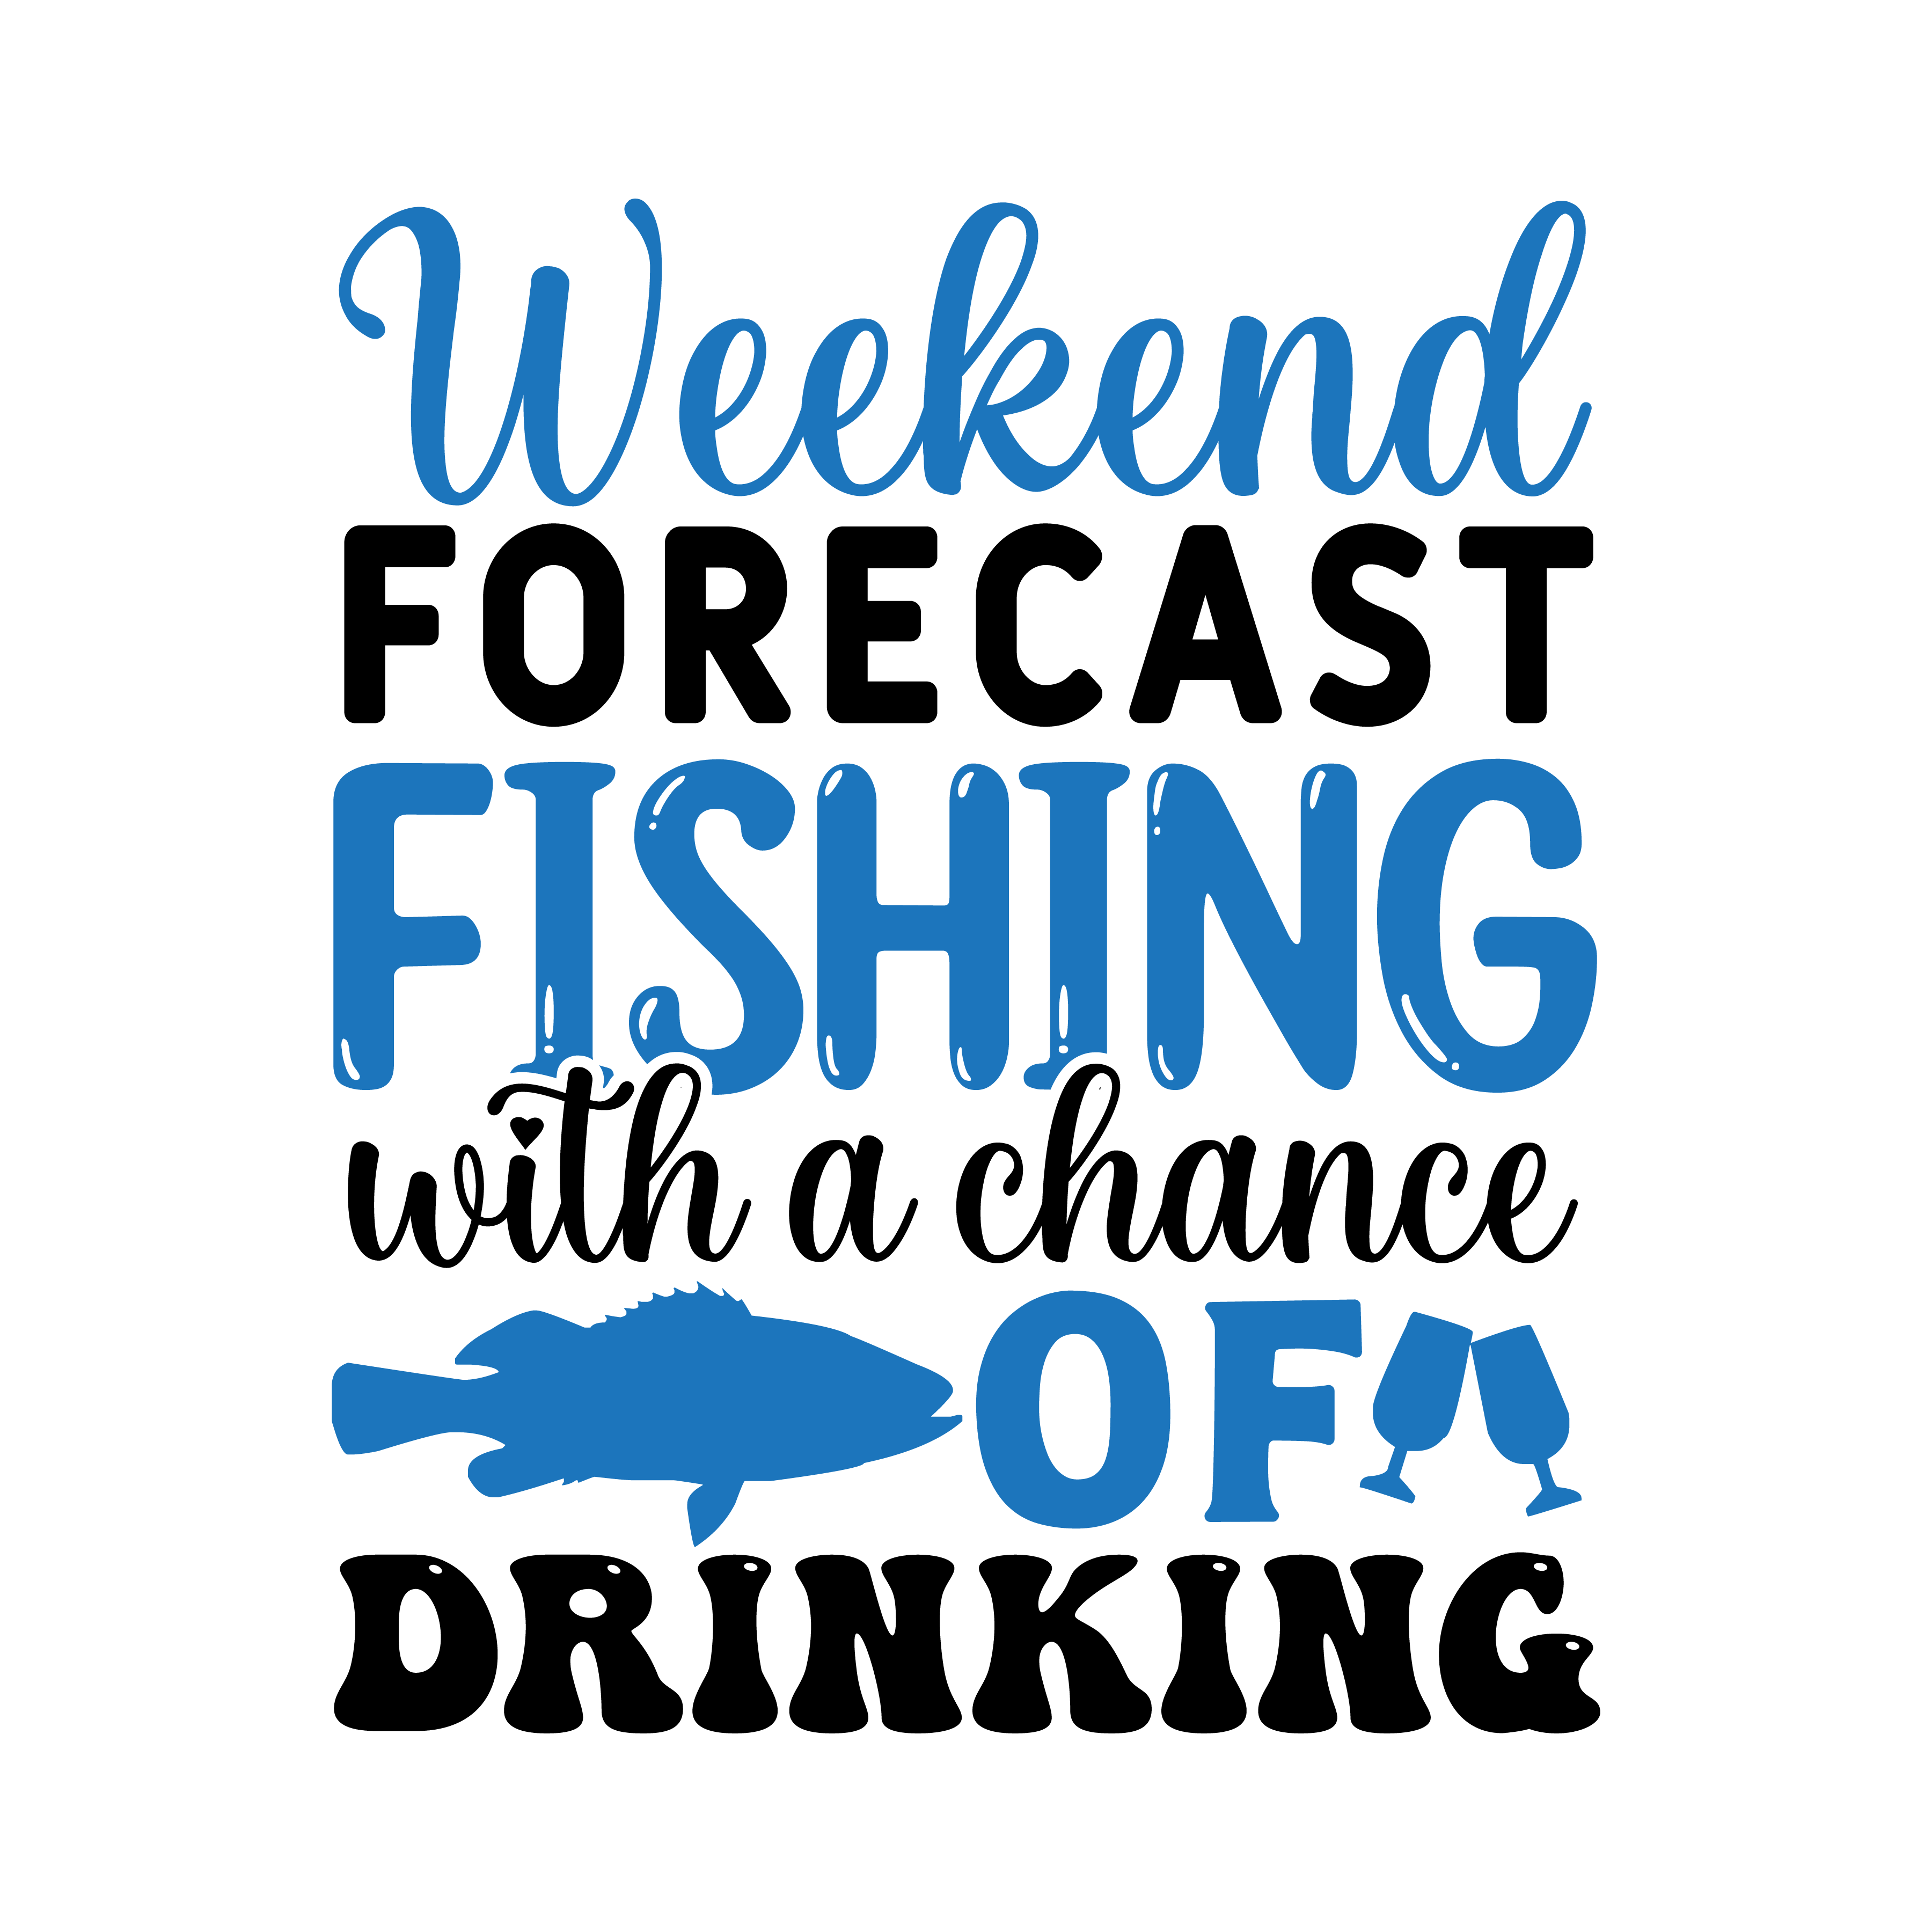 weekend forecast fishing with a chance of drinking, Fishing quotes, fishing sayings, Cricut designs, free, clip art, svg file, template, pattern, stencil, silhouette, cut file, design space, short, funny, shirt, cup, DIY crafts and projects, embroidery